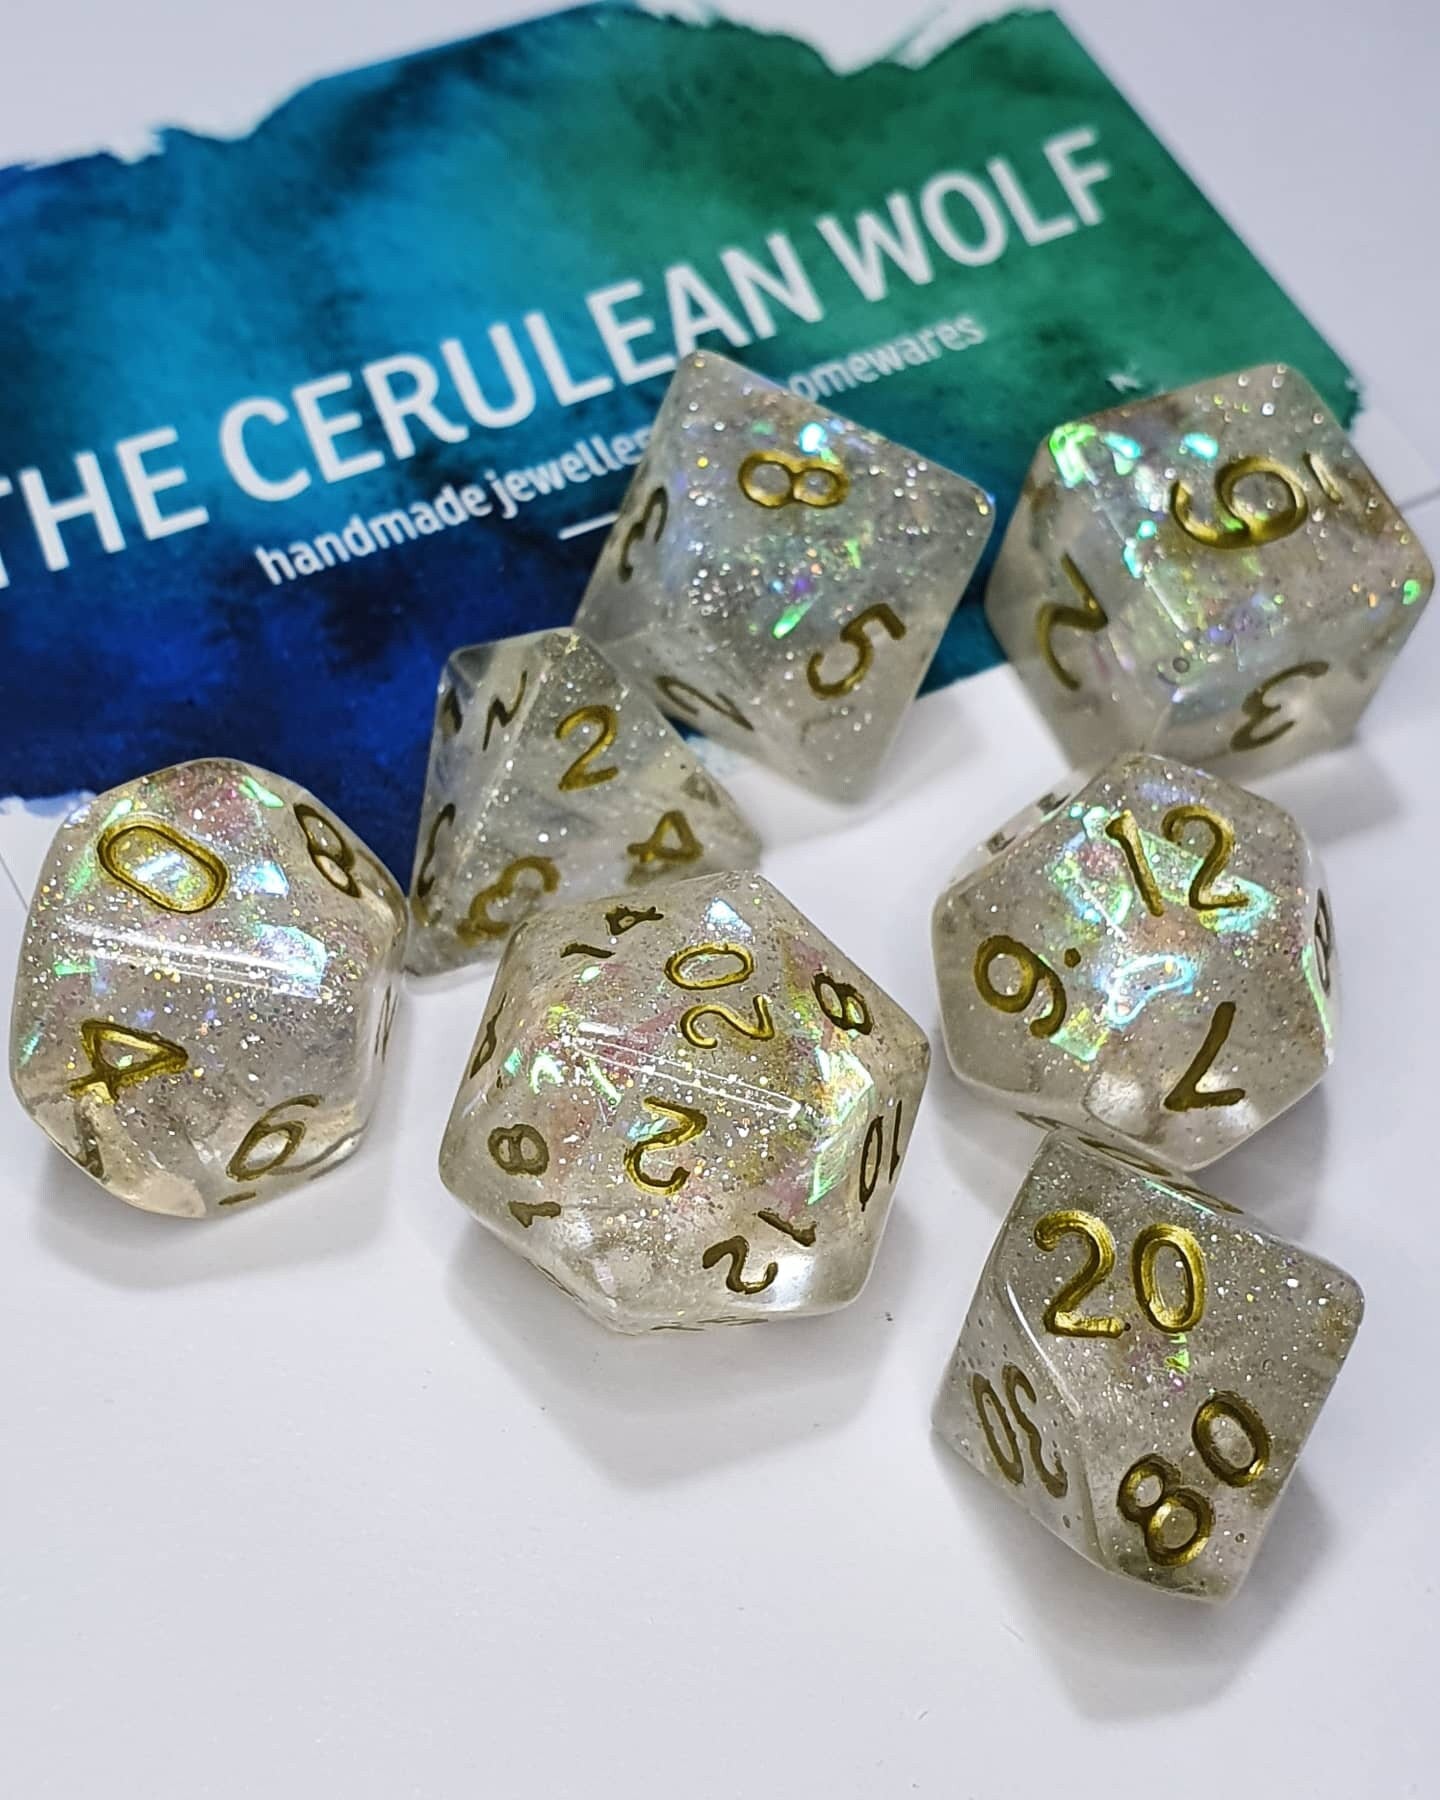 7 Holographic DND Dice - The Cerulean Wolf